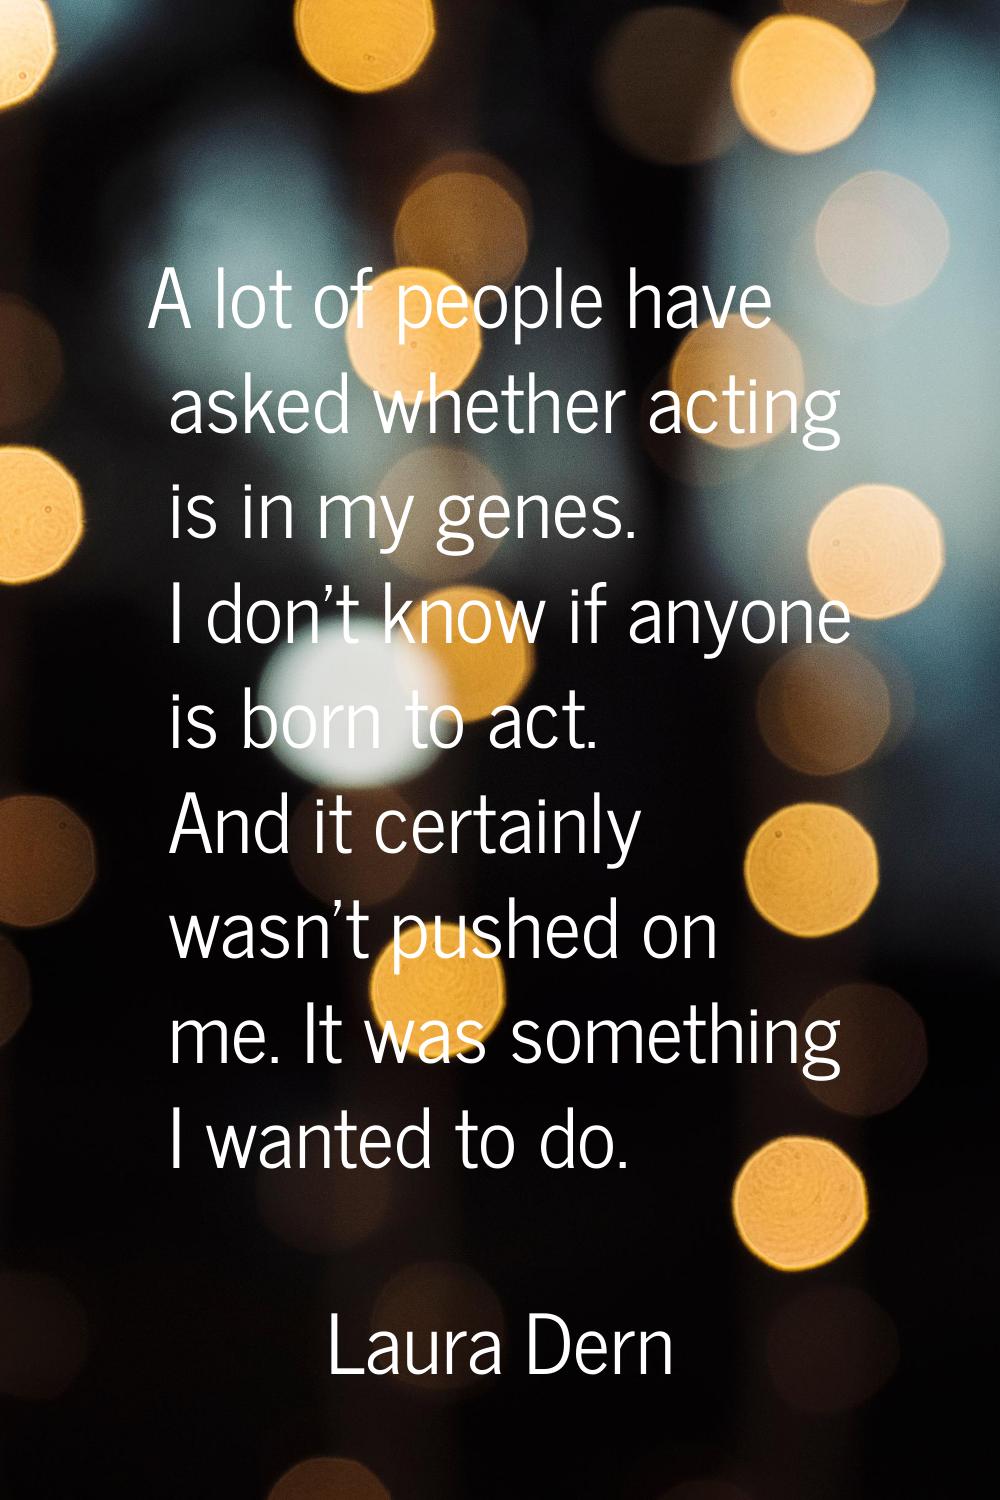 A lot of people have asked whether acting is in my genes. I don't know if anyone is born to act. An